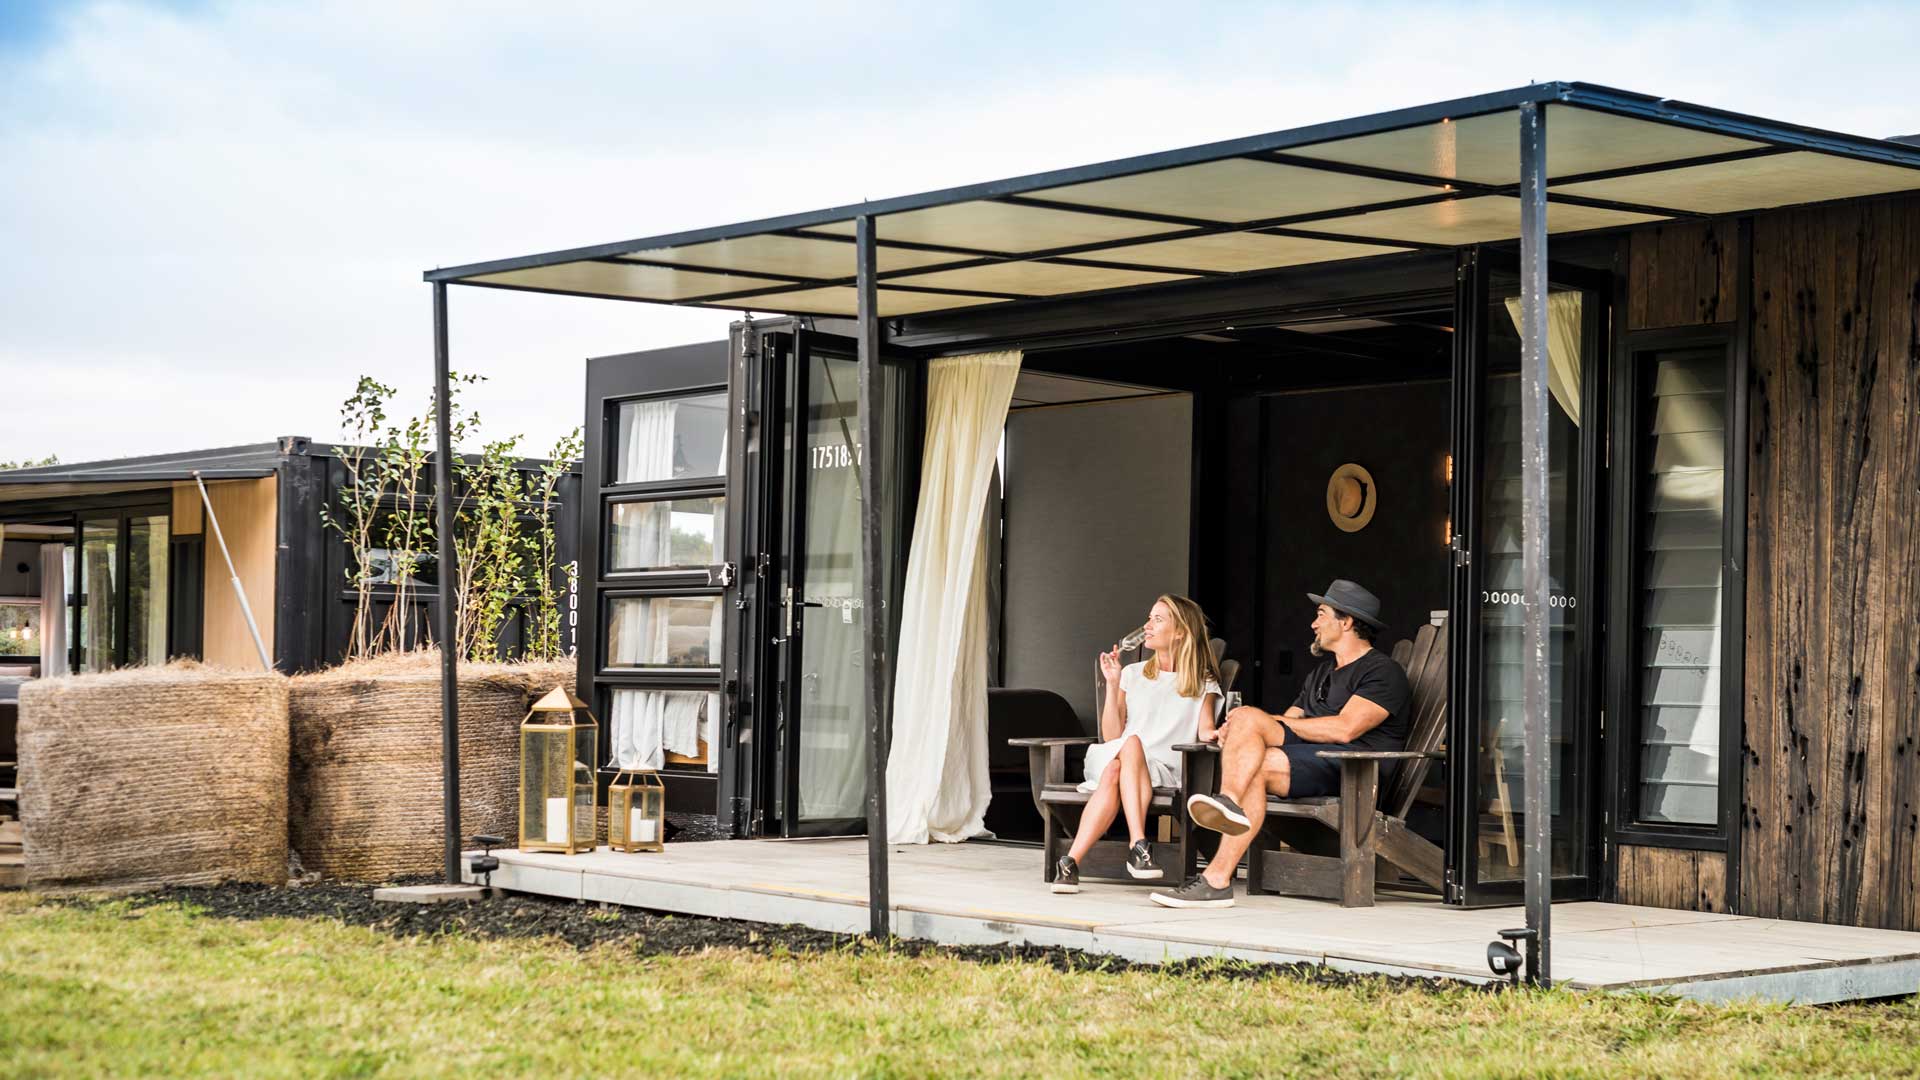 Two Shipping Container Hotels Are Popping Up on Victorian Wineries This Autumn